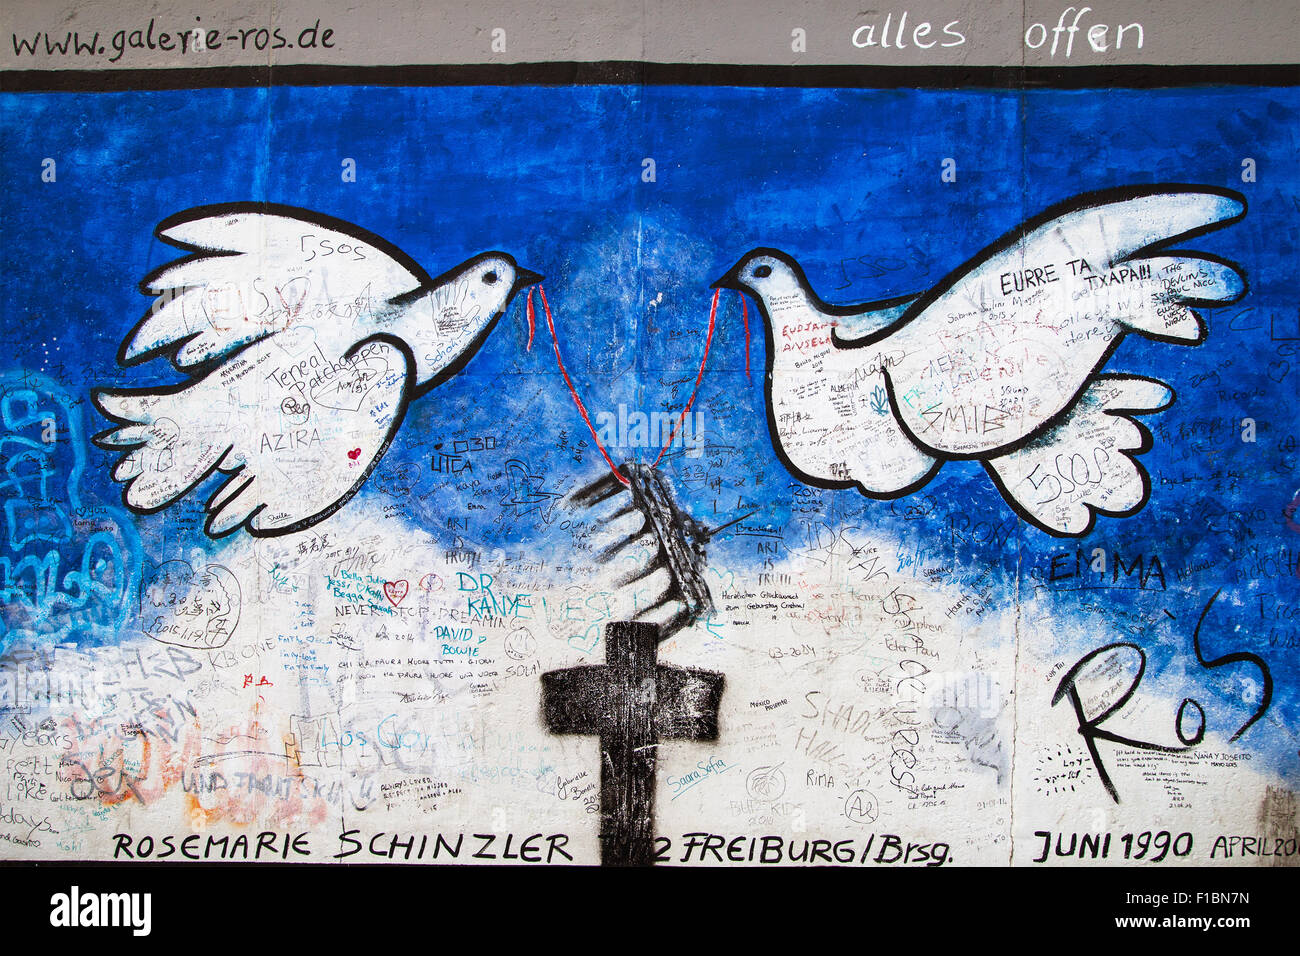 Mural 'Alles offen' by Rosemarie Schinzler on the East Side Gallery, Berlin, Germany. Stock Photo